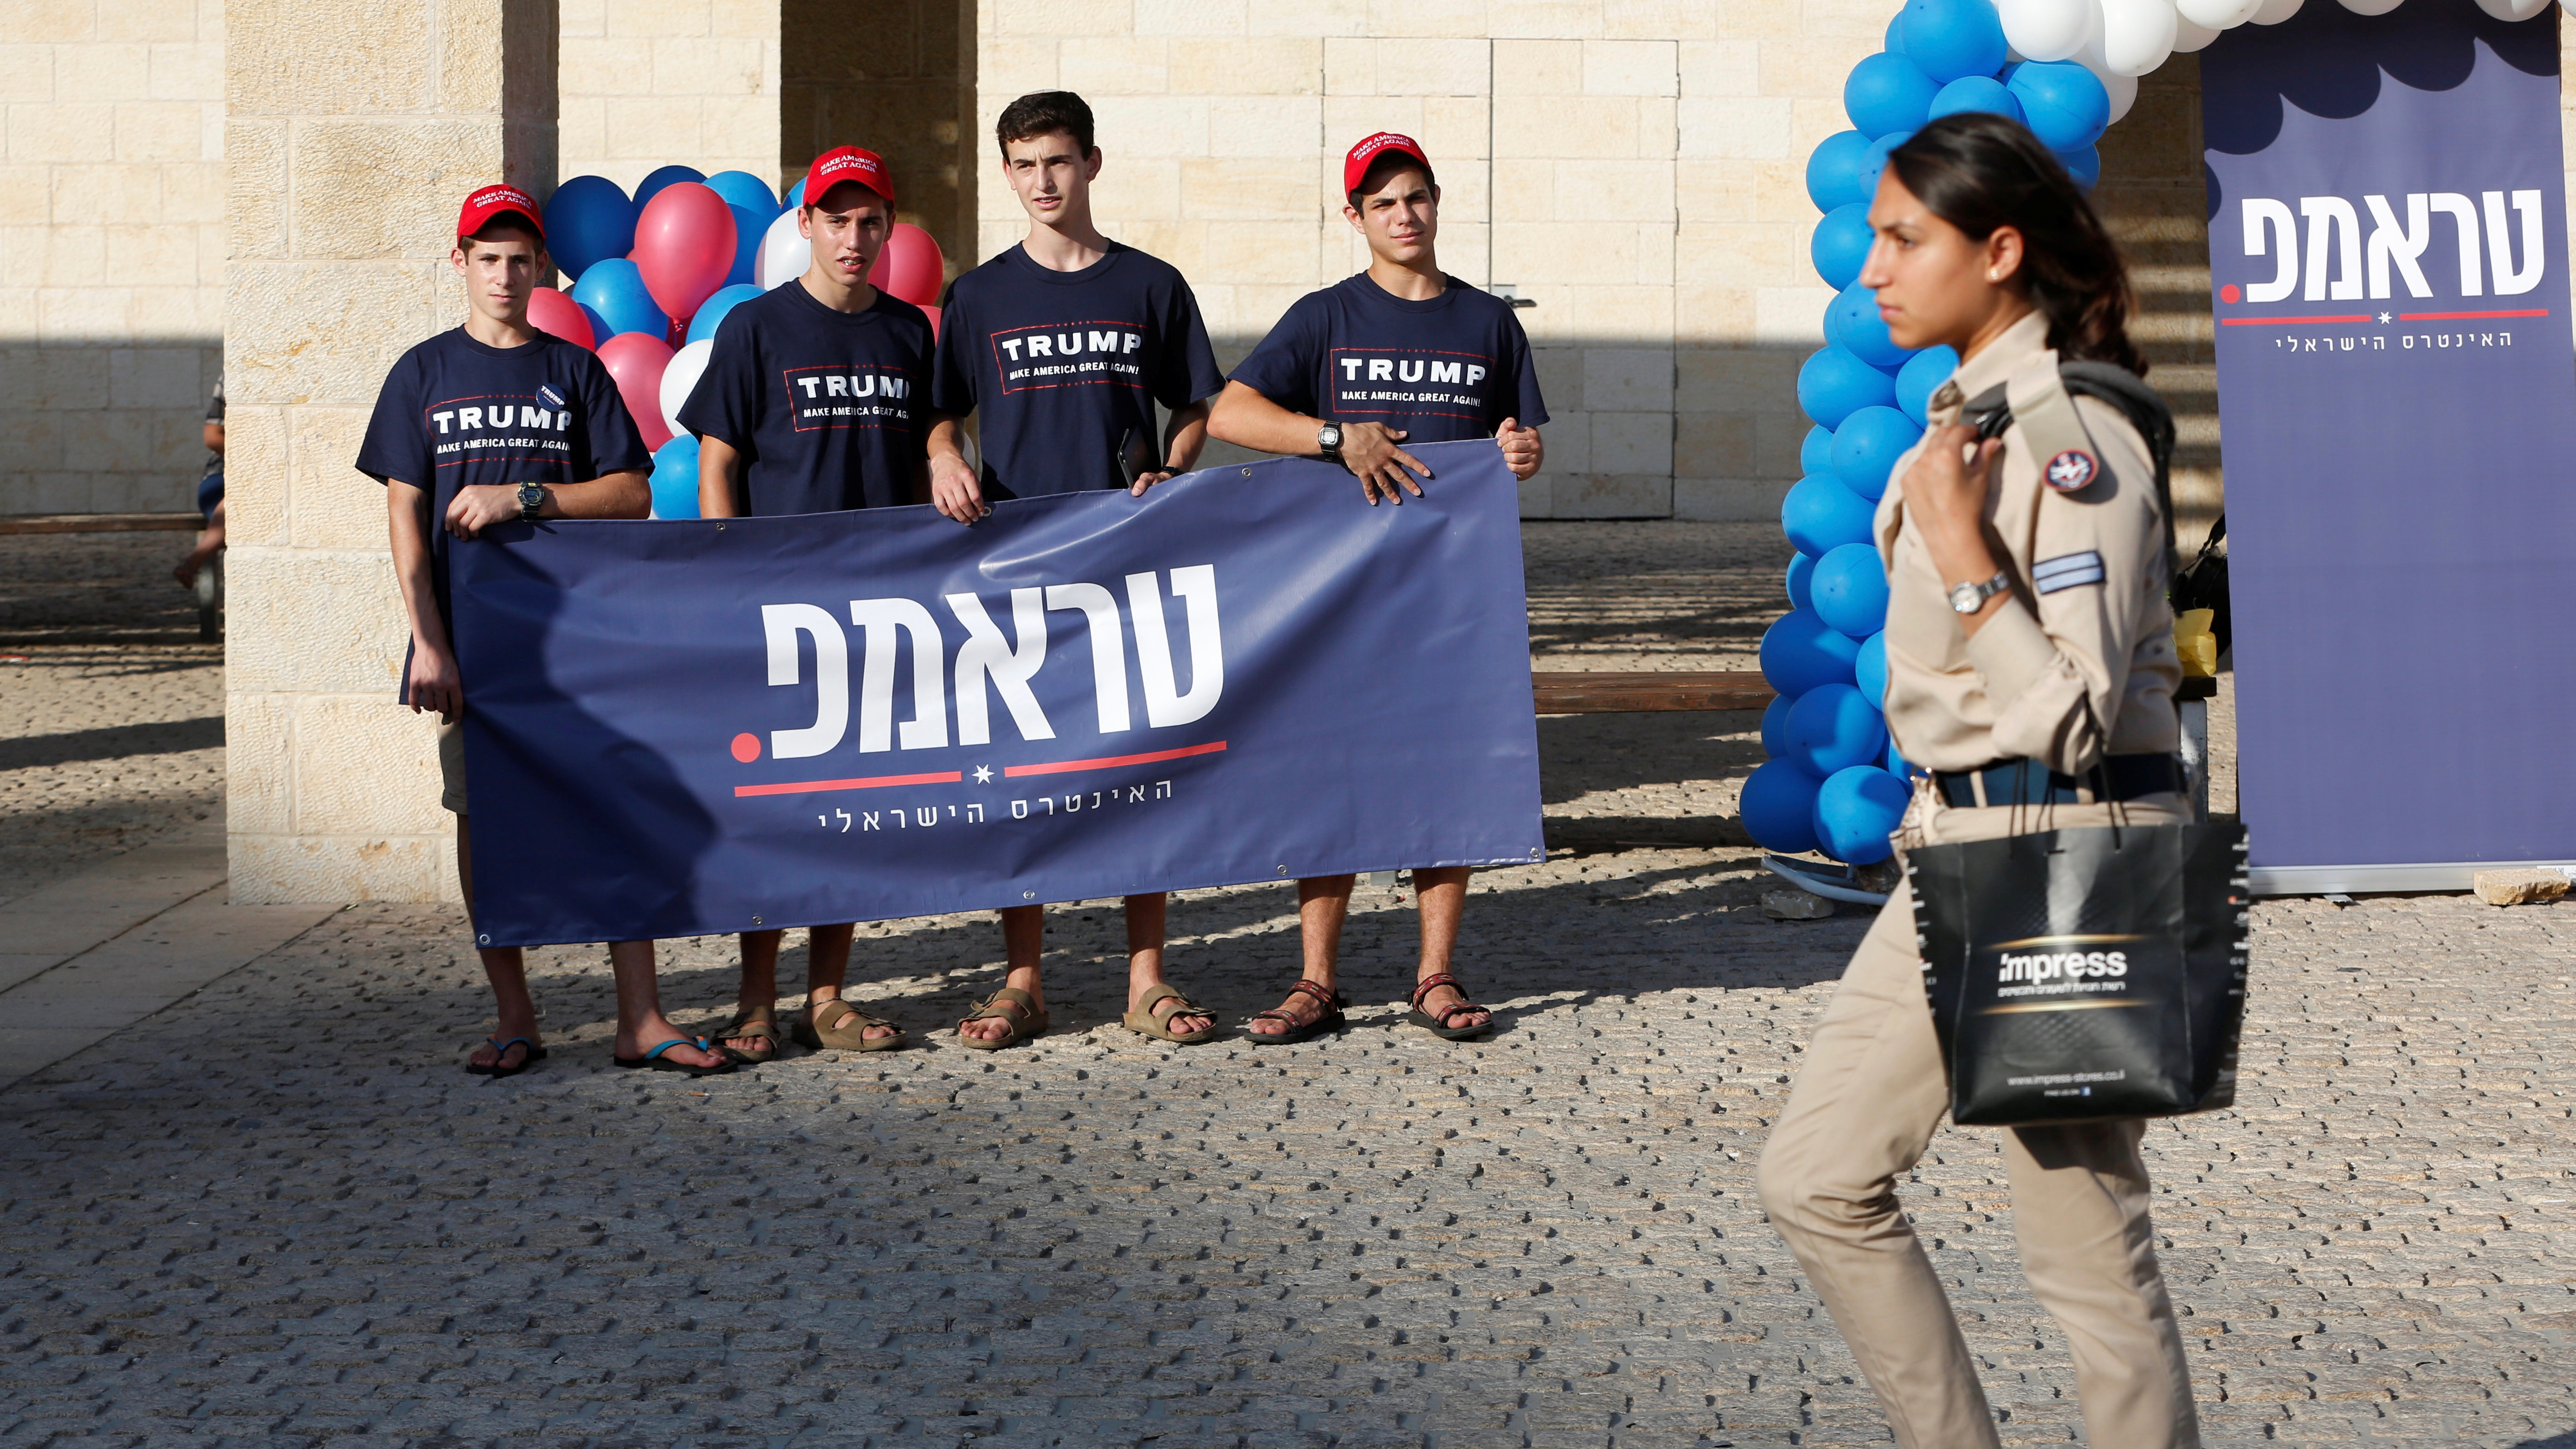 An Israeli soldier walks past U.S. Republican Party activists in Israel, who are holding a banner in support of their presidential nominee, Donald Trump, during a campaign aimed at potential American voters living in Israel, near a mall in Modi'in, Israel